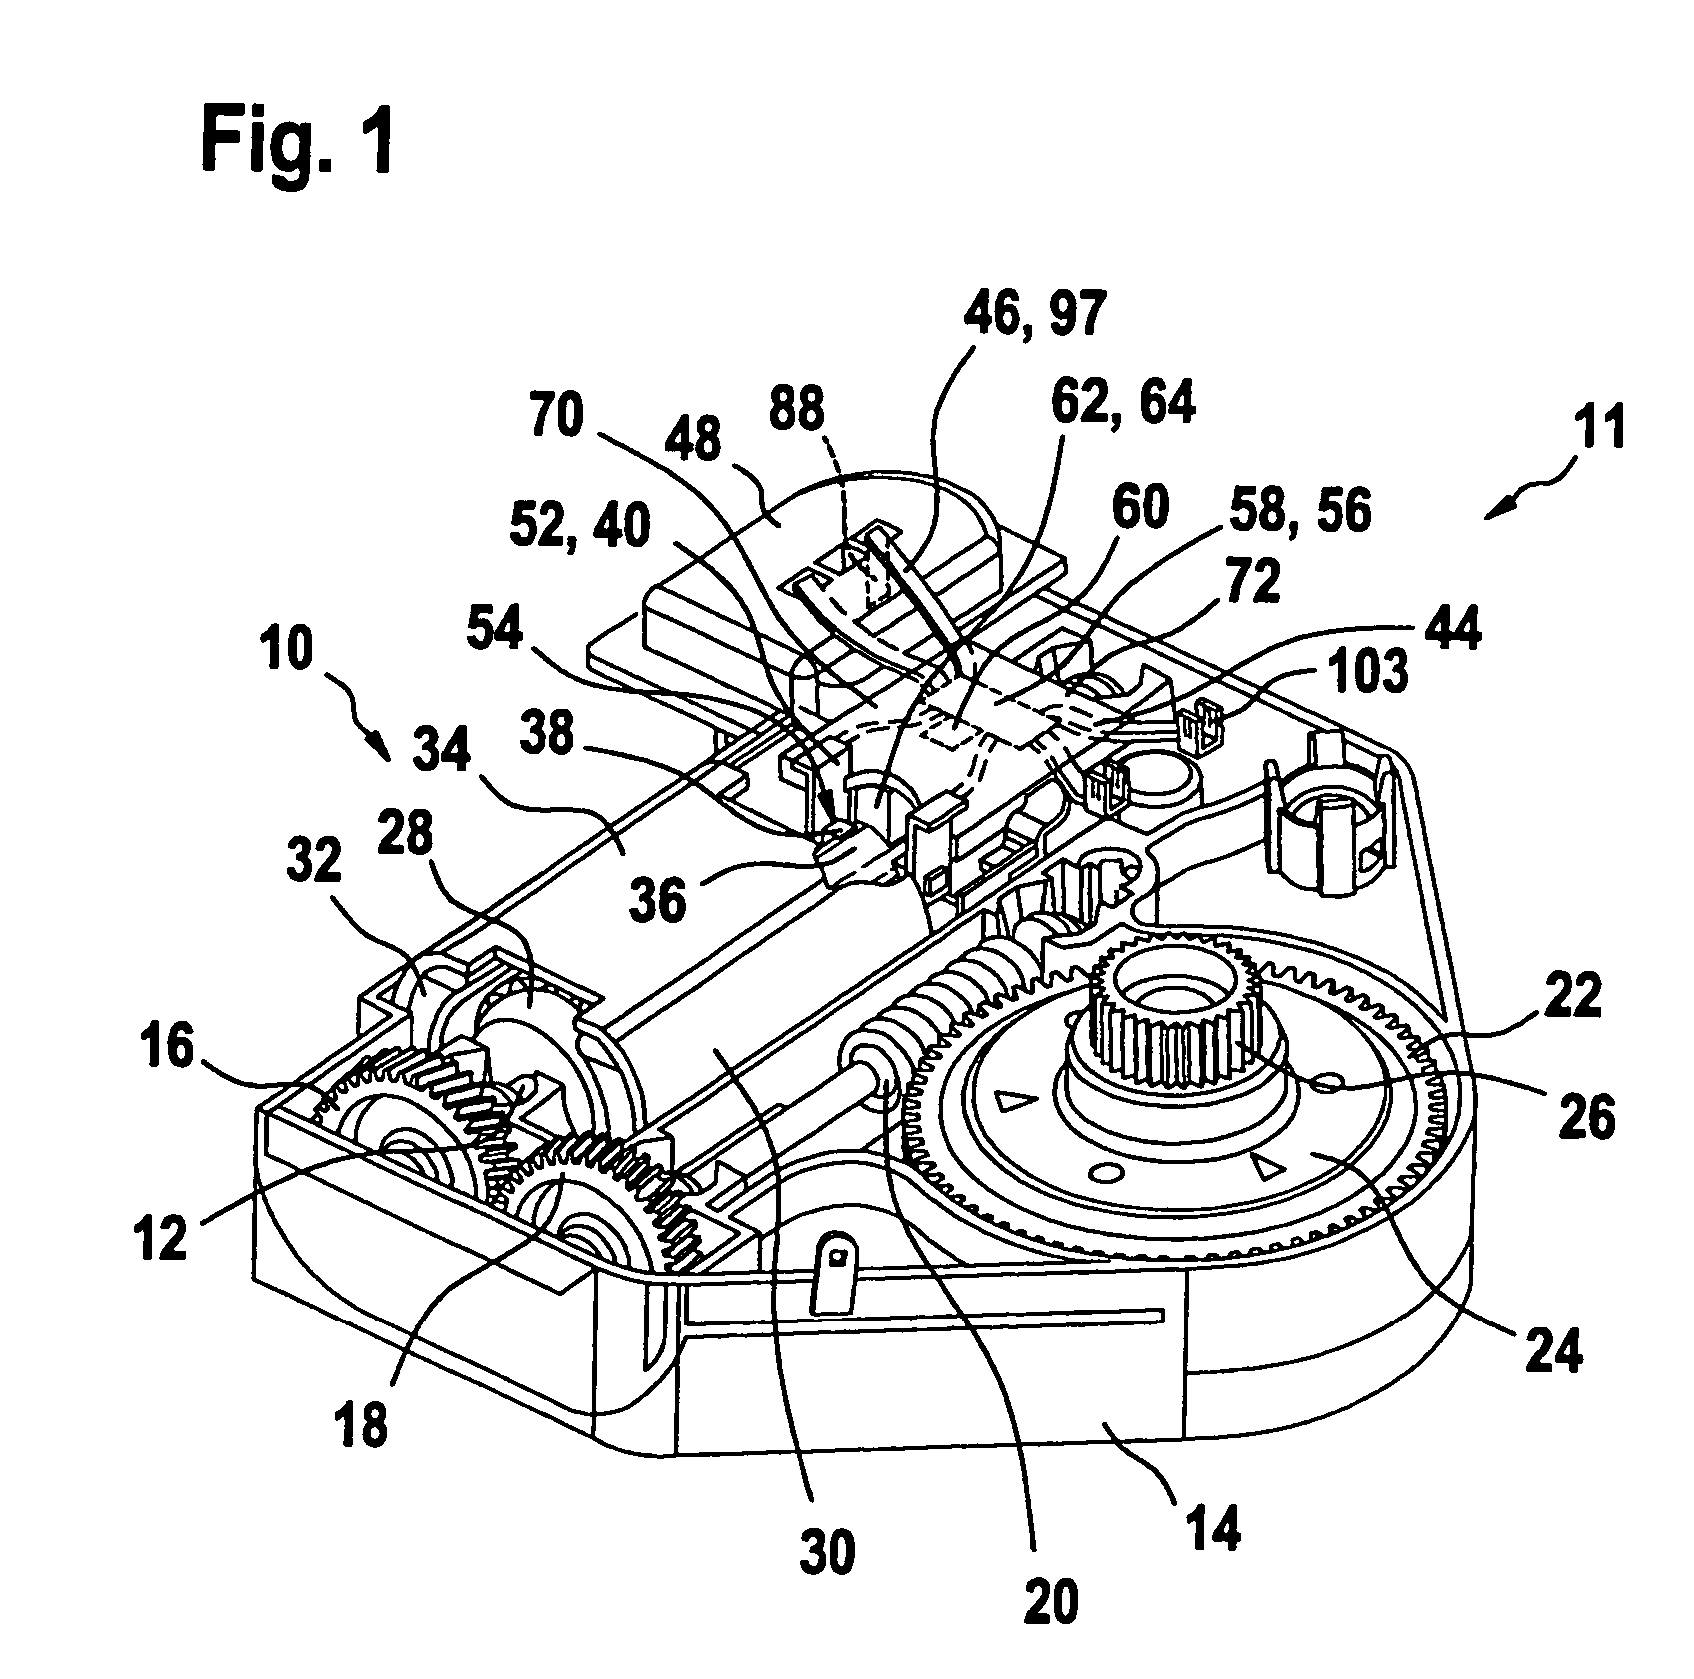 Electric motor comprising an electronic unit with a punched grid